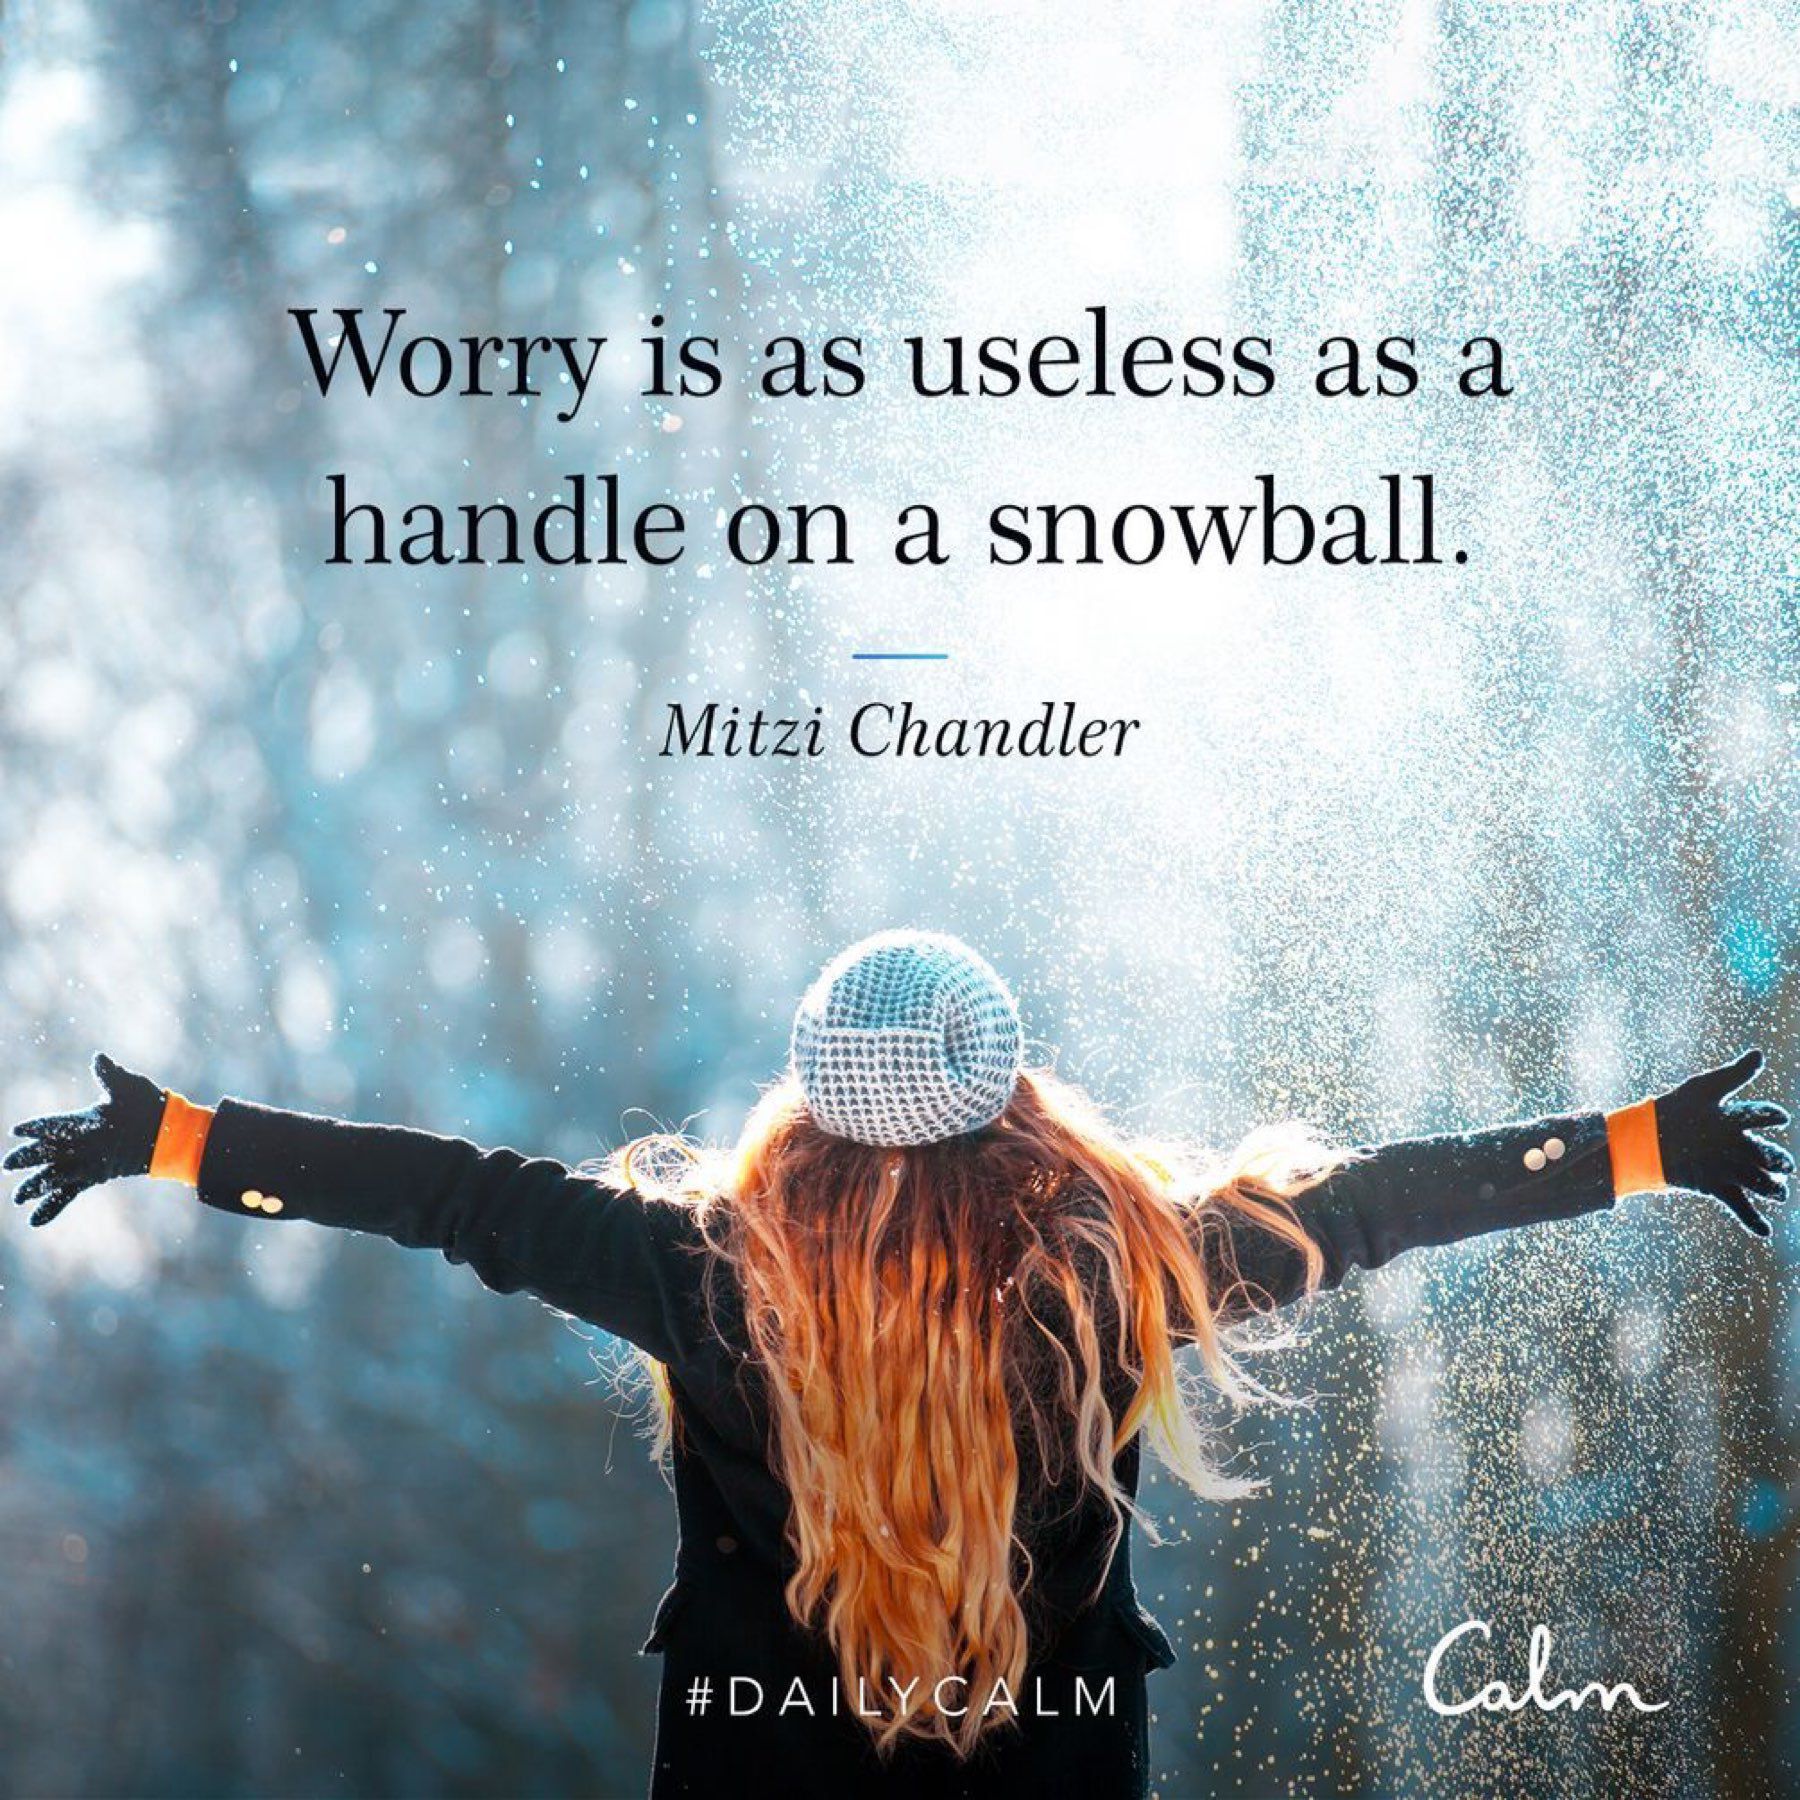 Worry is as useless as a handle on a snowball